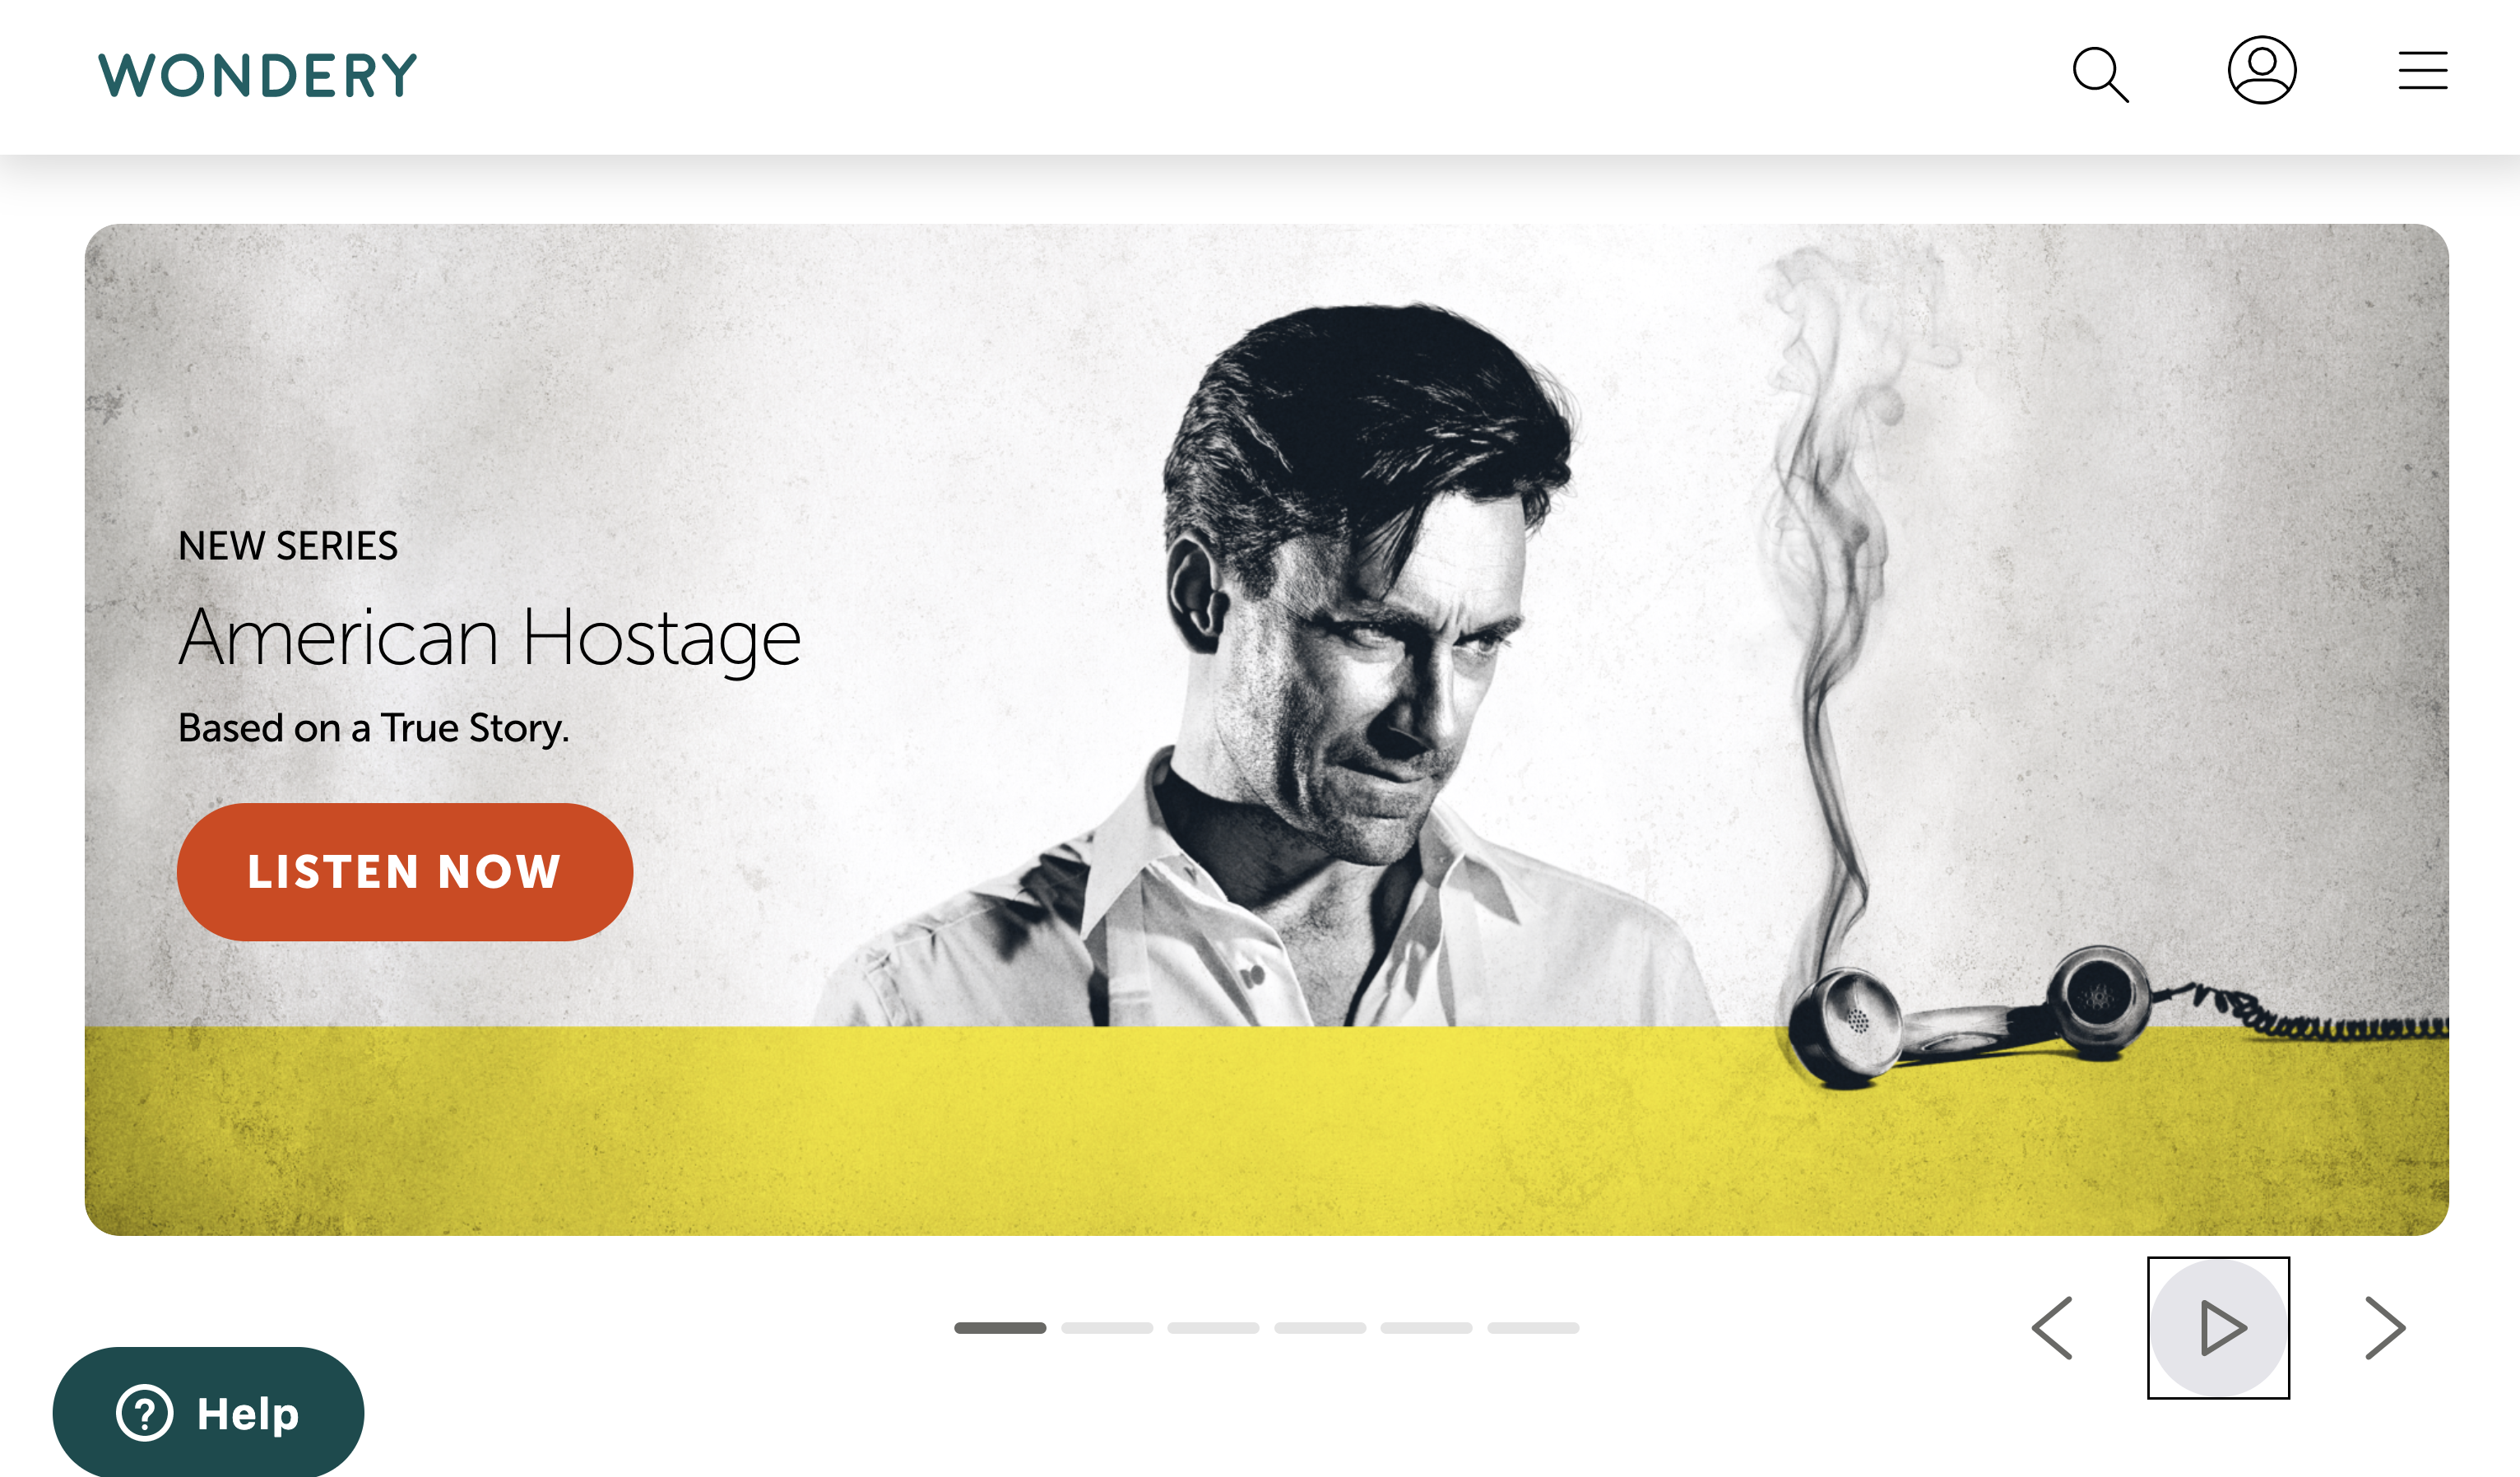 Wondery homepage with image of American Hostage podcast and a Listen Now button